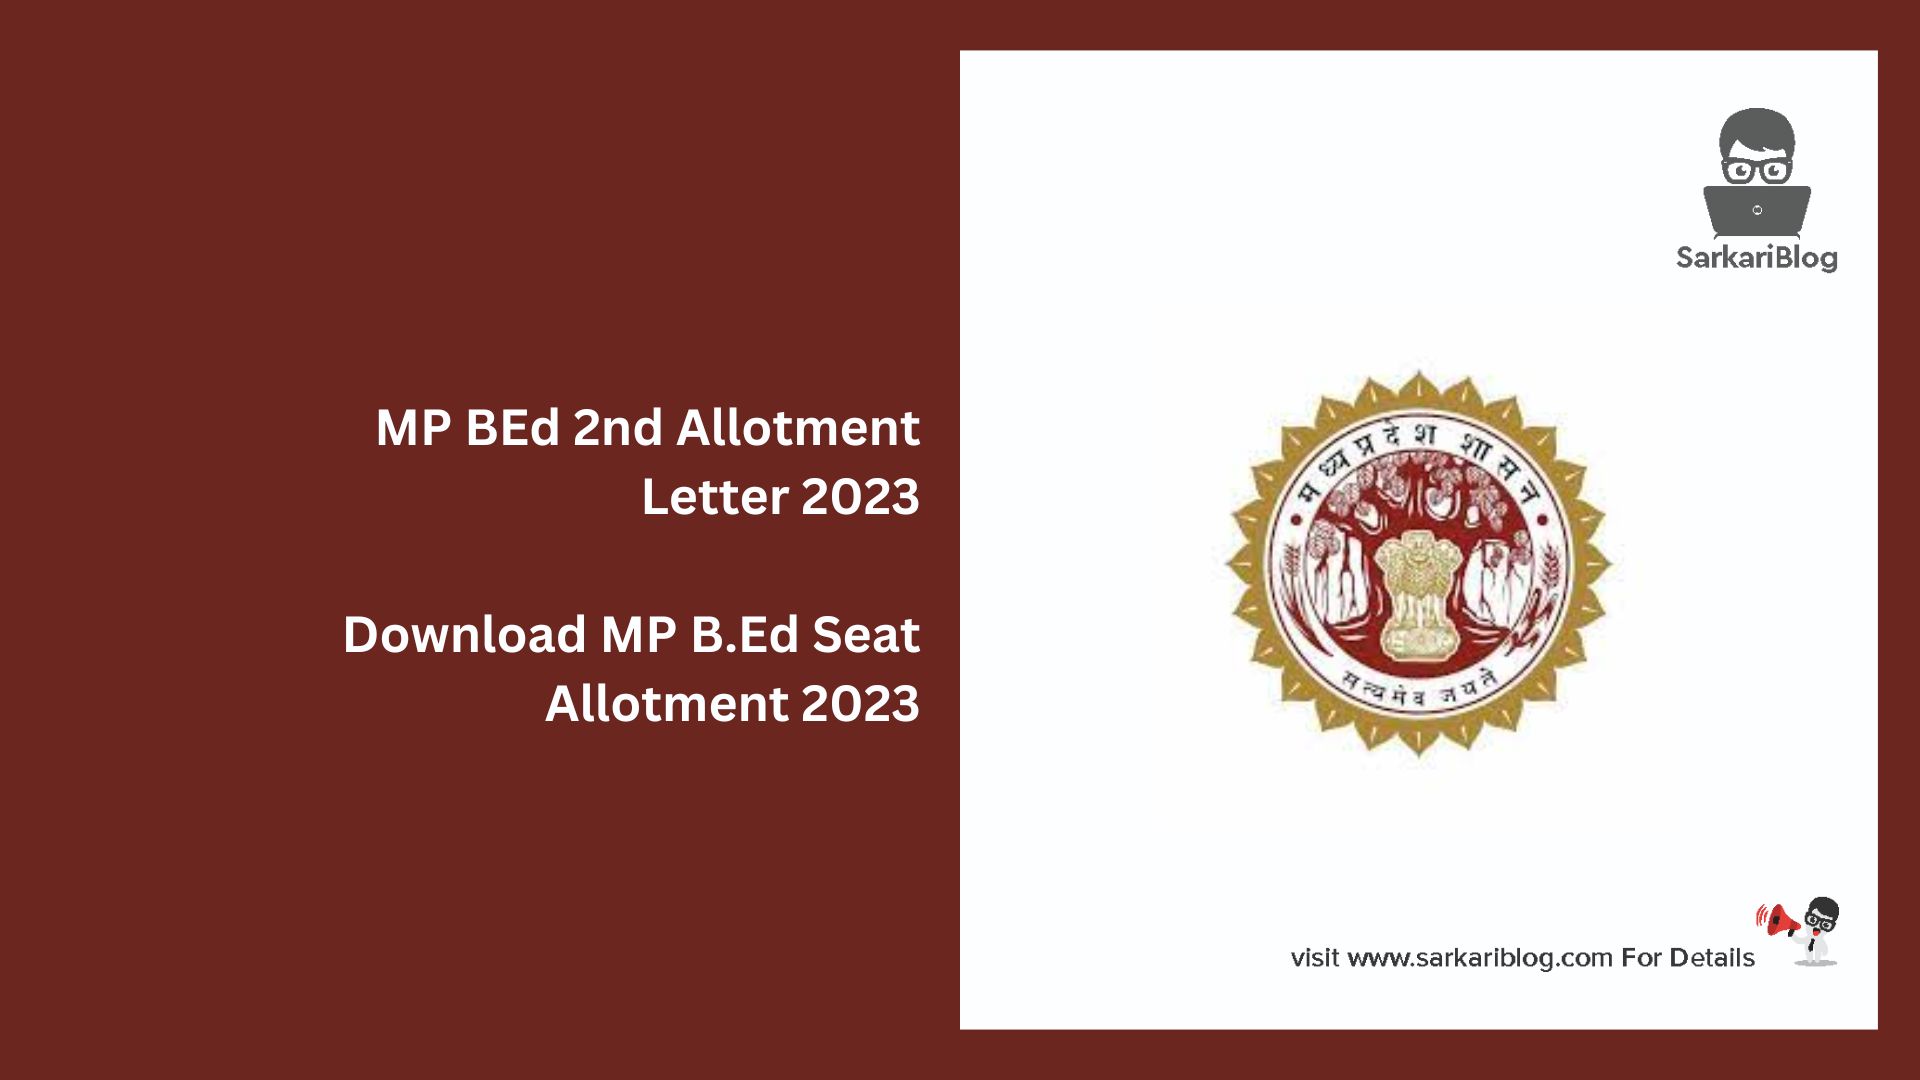 MP BEd 2nd Allotment Letter 2023